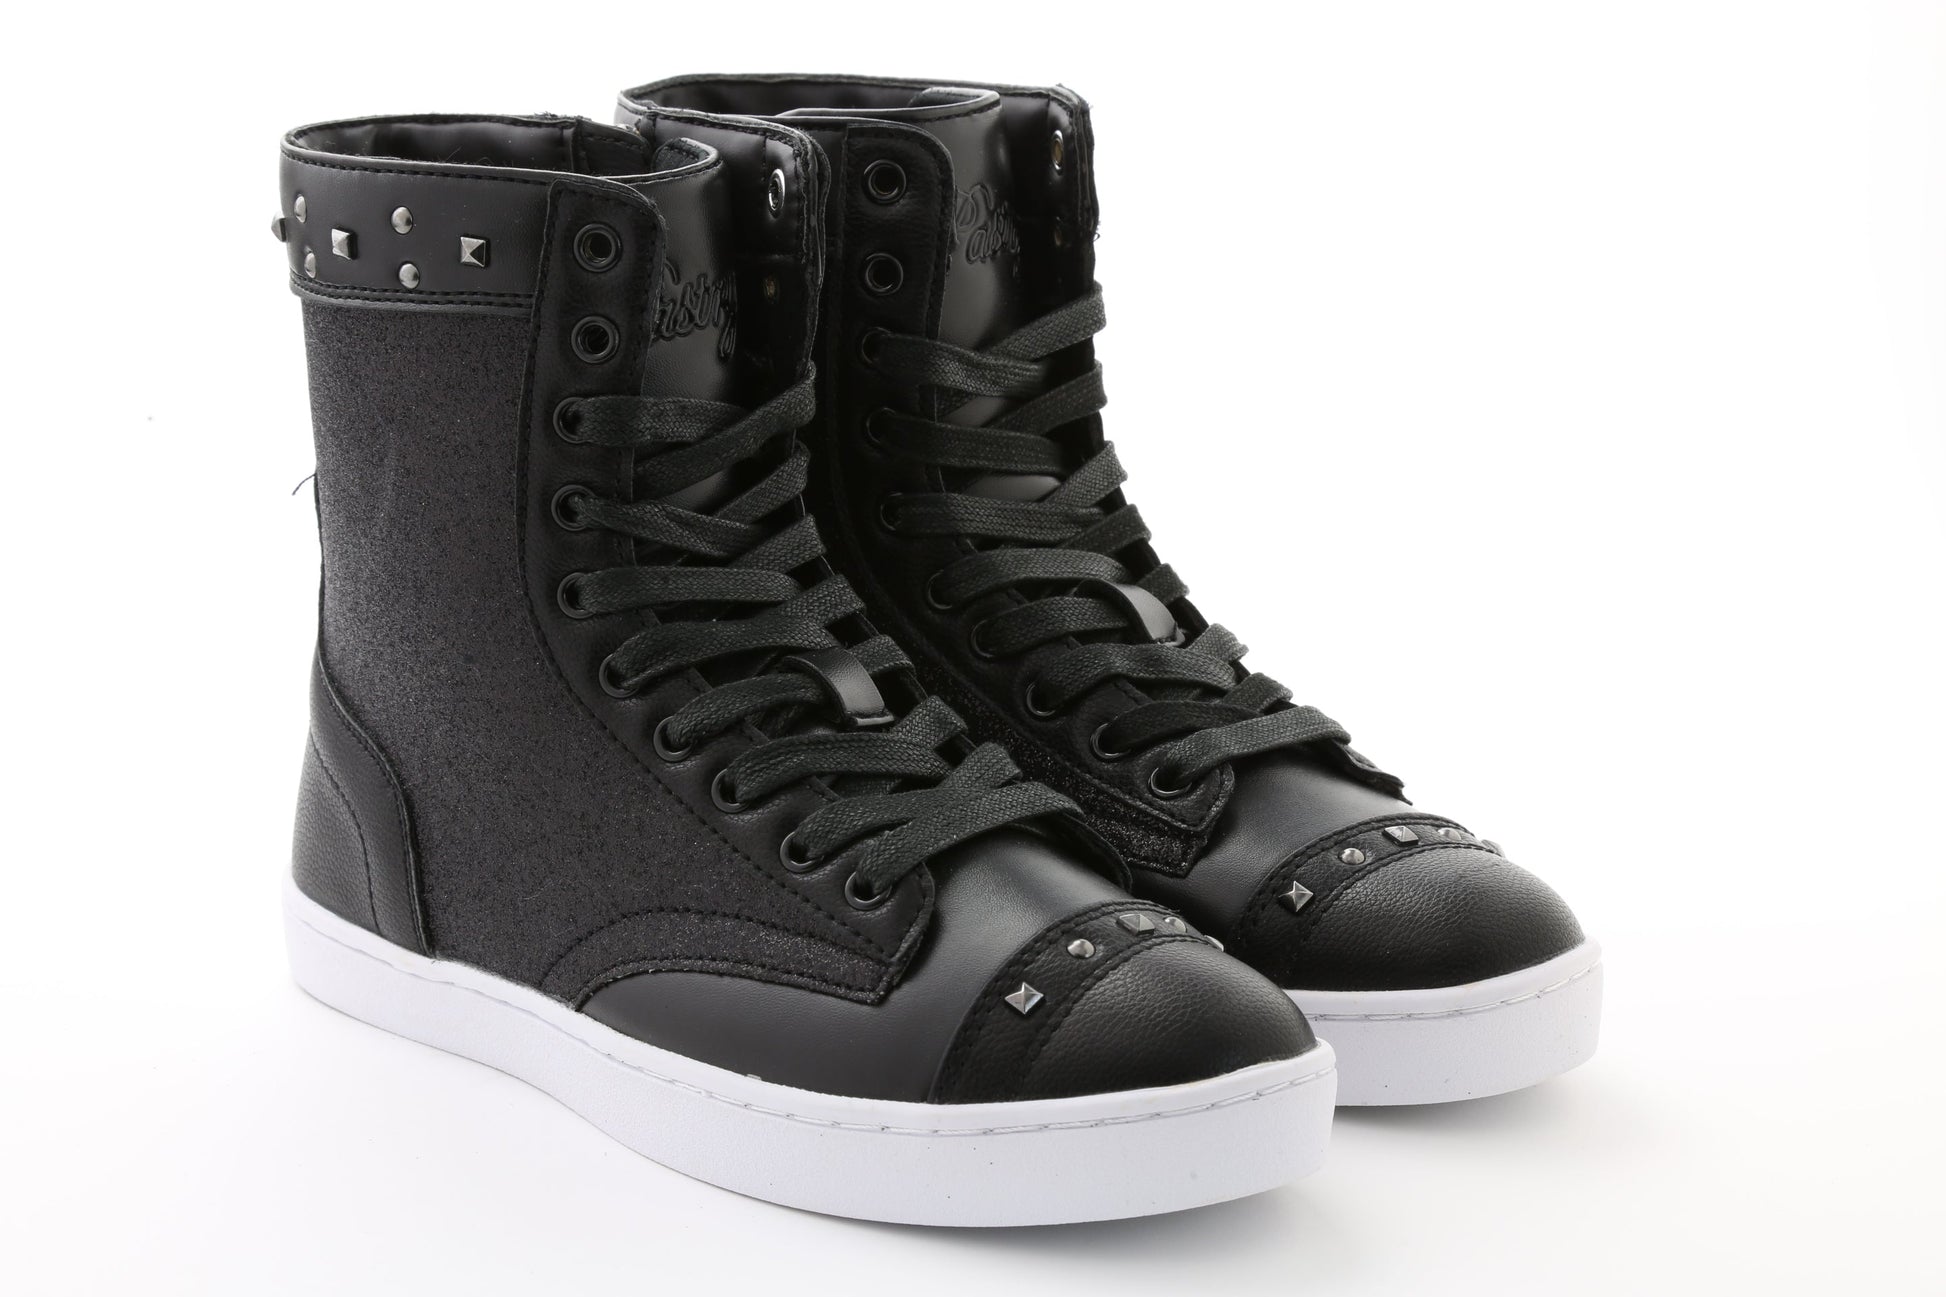 Pair of Pastry Military Glitz Adult Women's Sneaker Boot in Black/White